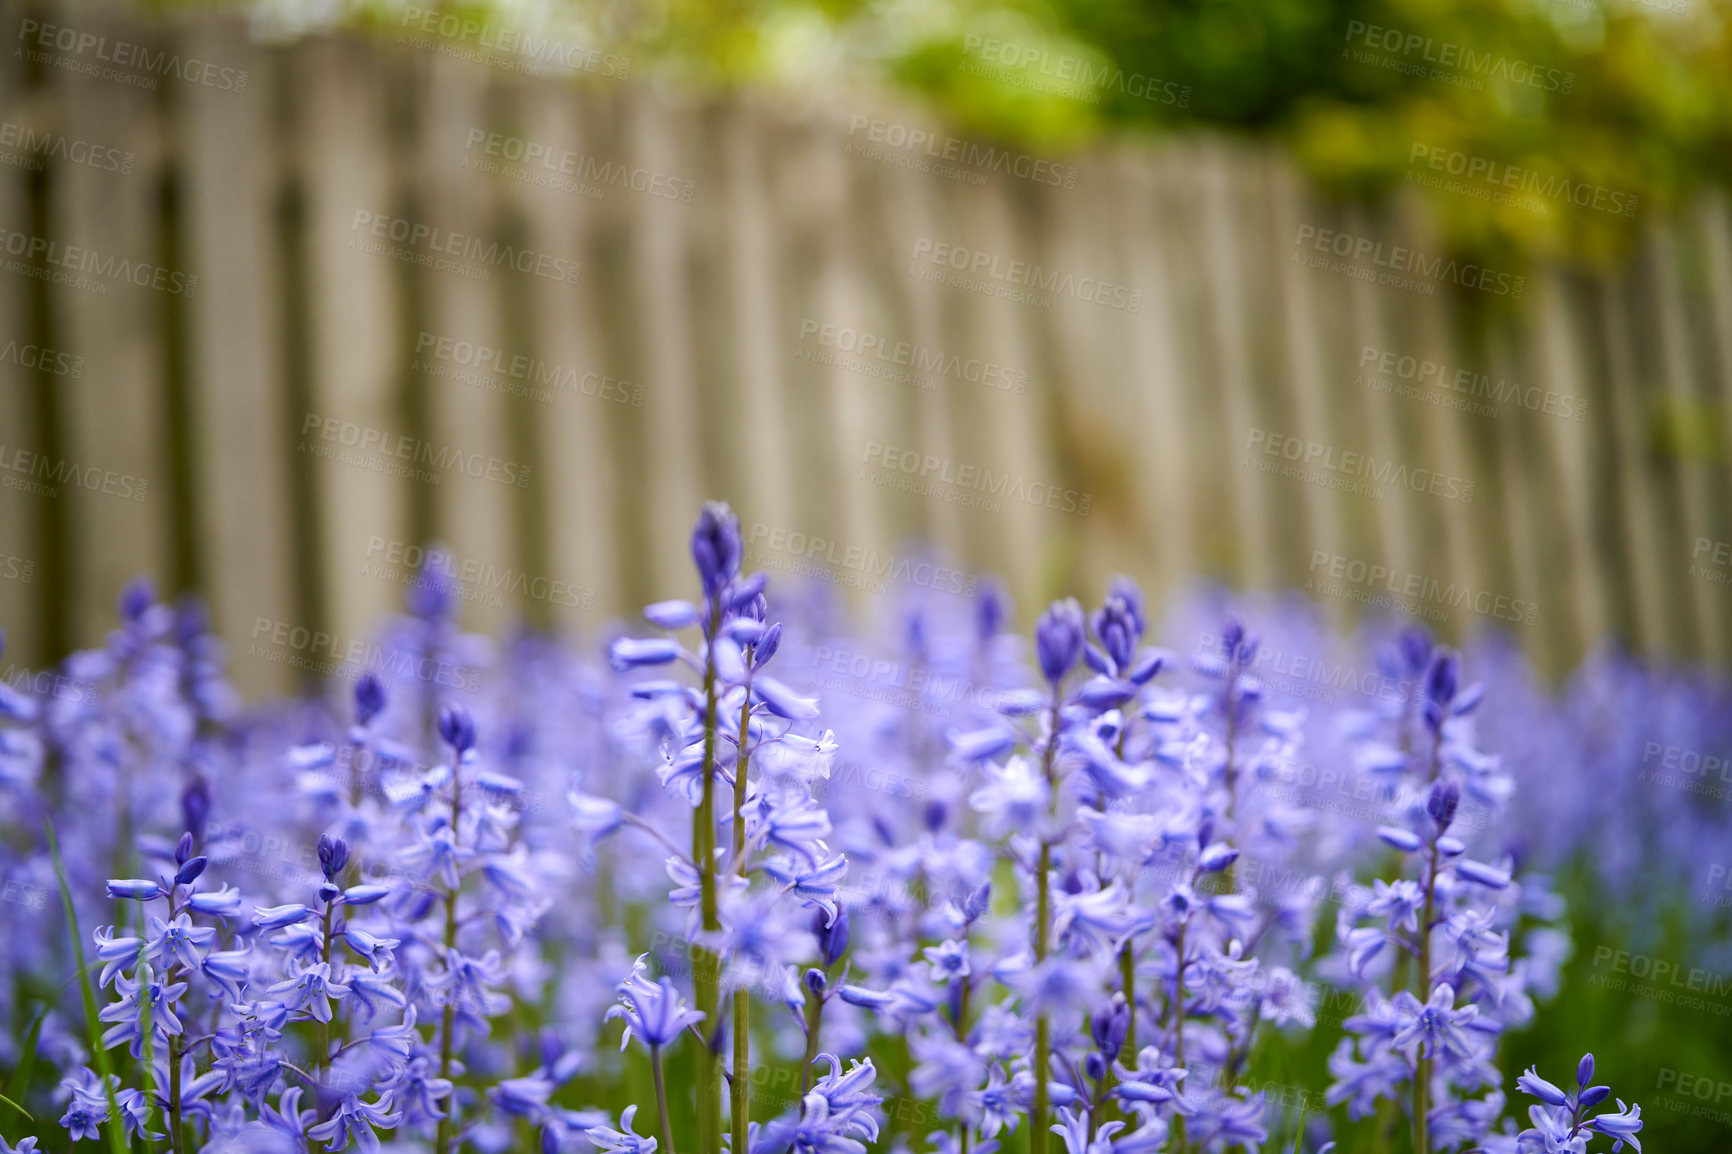 Buy stock photo Bluebell flowers growing in a backyard garden in summer Scilla siberica violet flowering plants decorating and landscaping a lawn at home. Purple wildflowers blooming and blossoming in nature